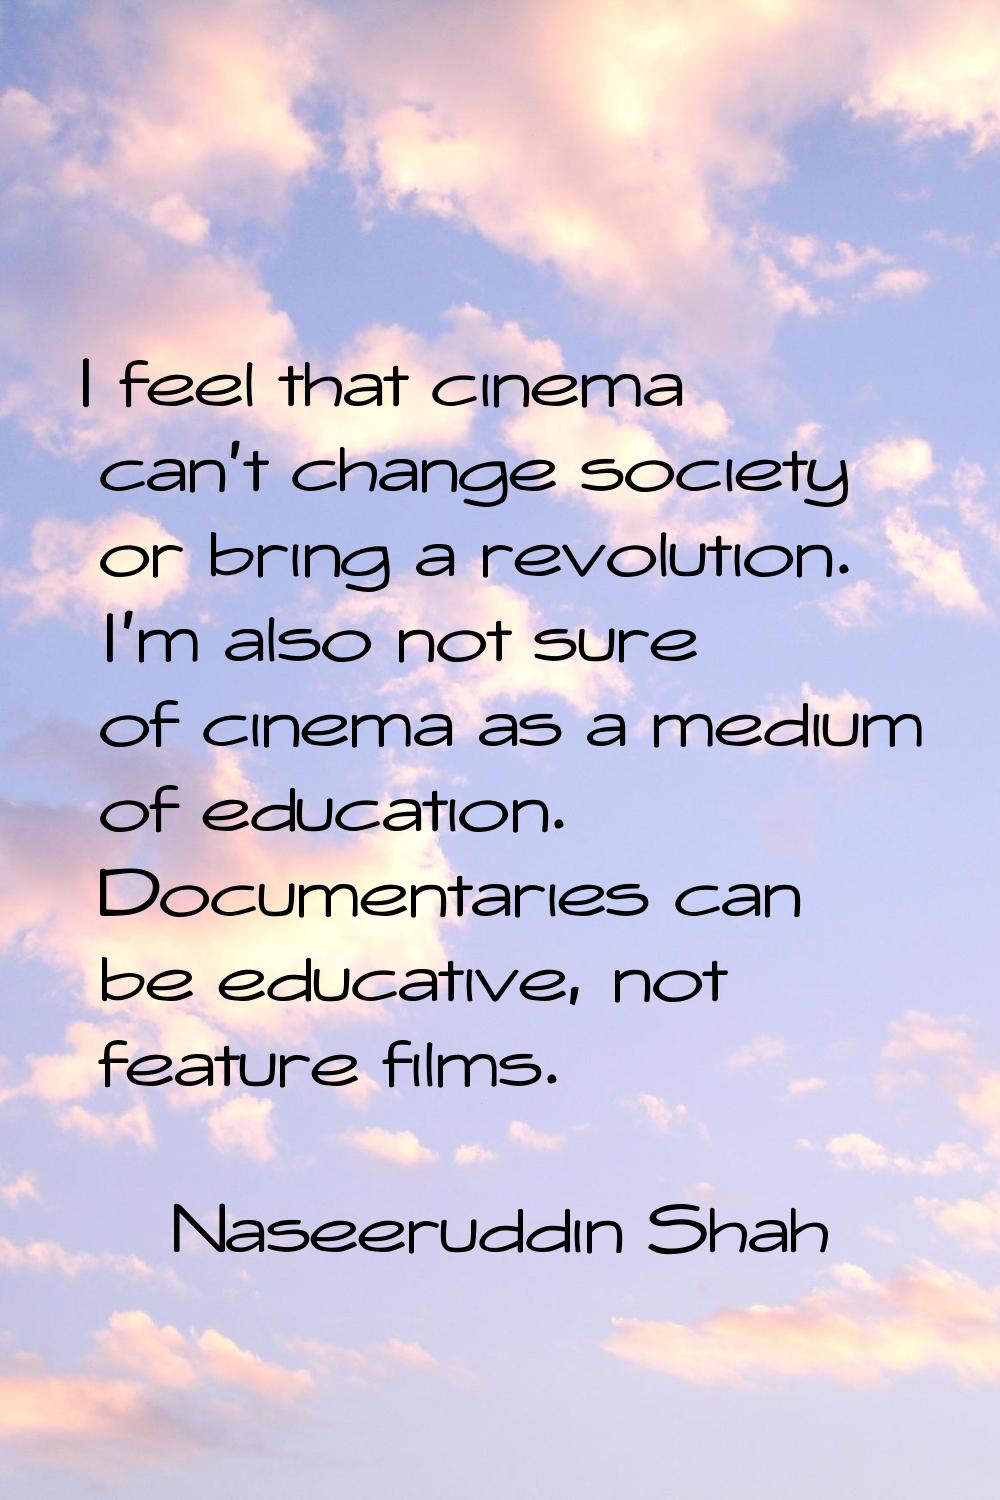 I feel that cinema can't change society or bring a revolution. I'm also not sure of cinema as a med